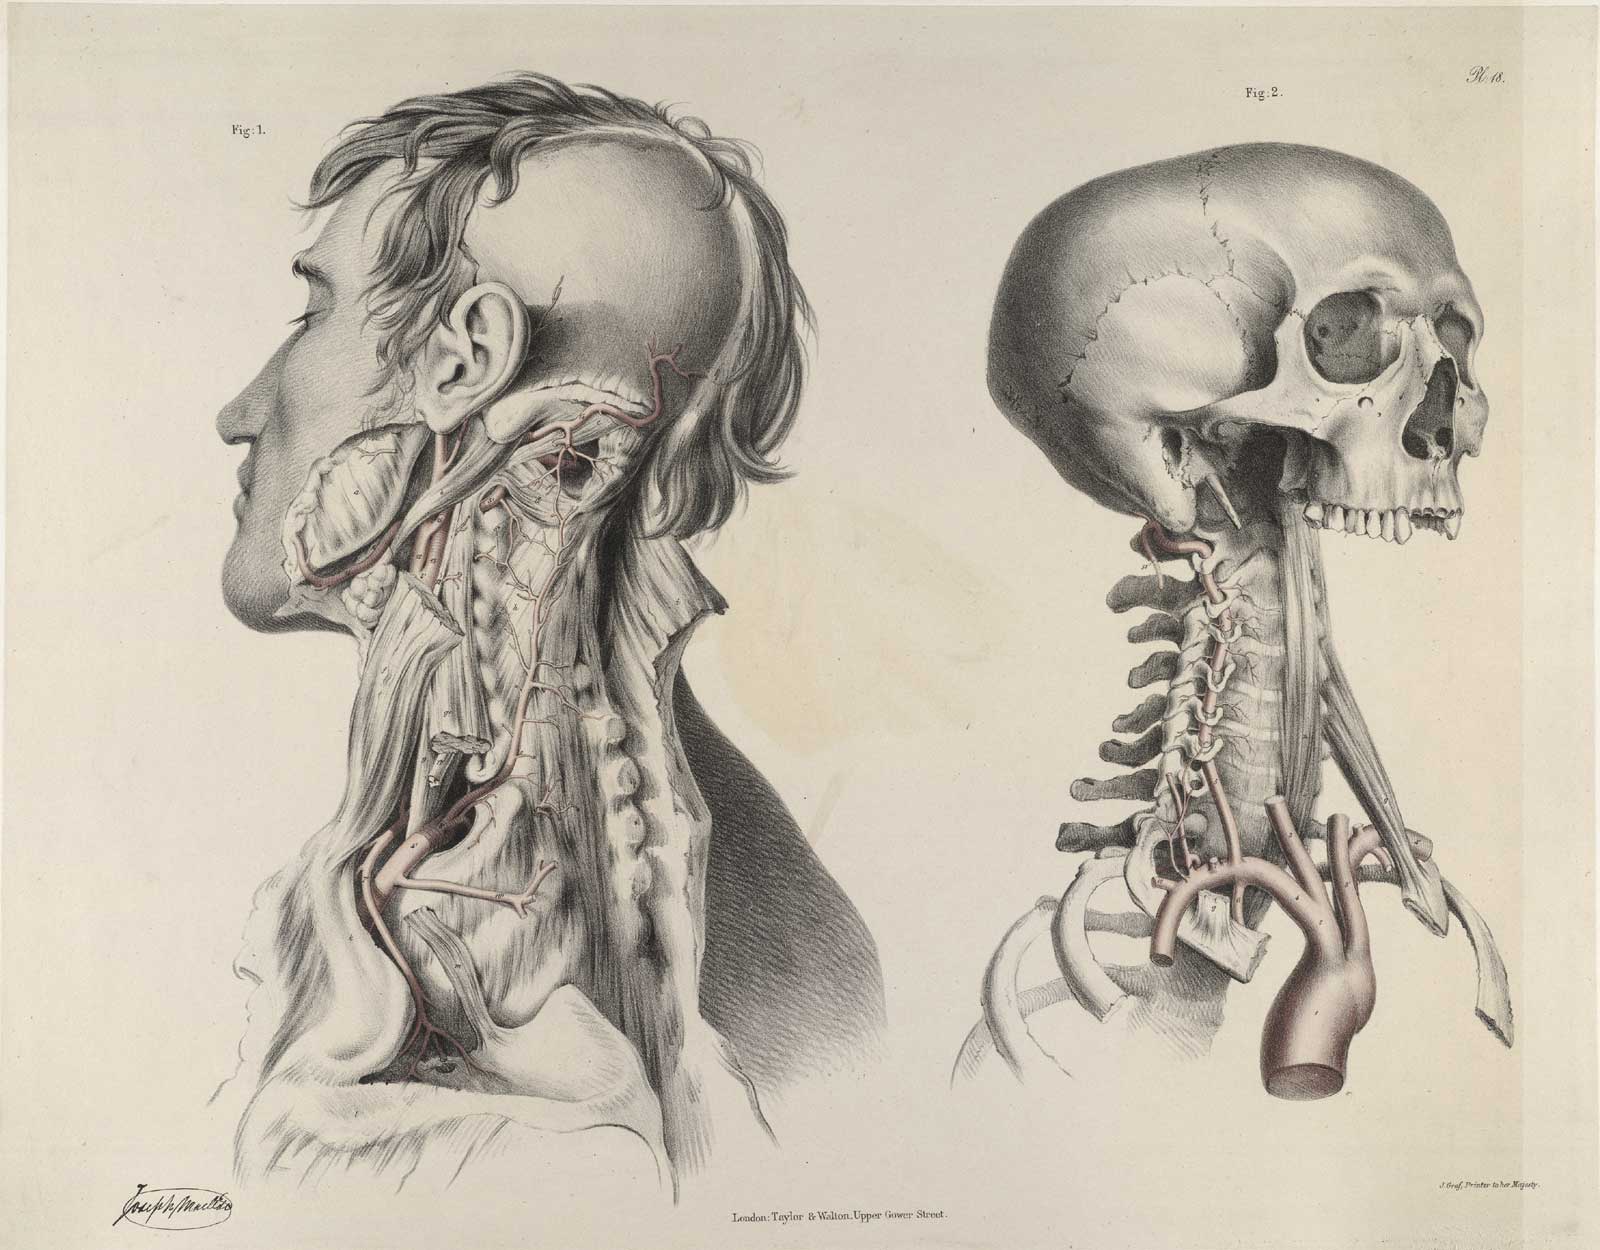 Plate 18 of Quain's The anatomy of the arteries of the human body, with its applications to pathology and operative surgery, featuring two views of the arteries of the neck. The left view is a flayed male corpse from the middle of the vertebra to the side of the face, while the right view is the arterties running through the bones of neck and head.